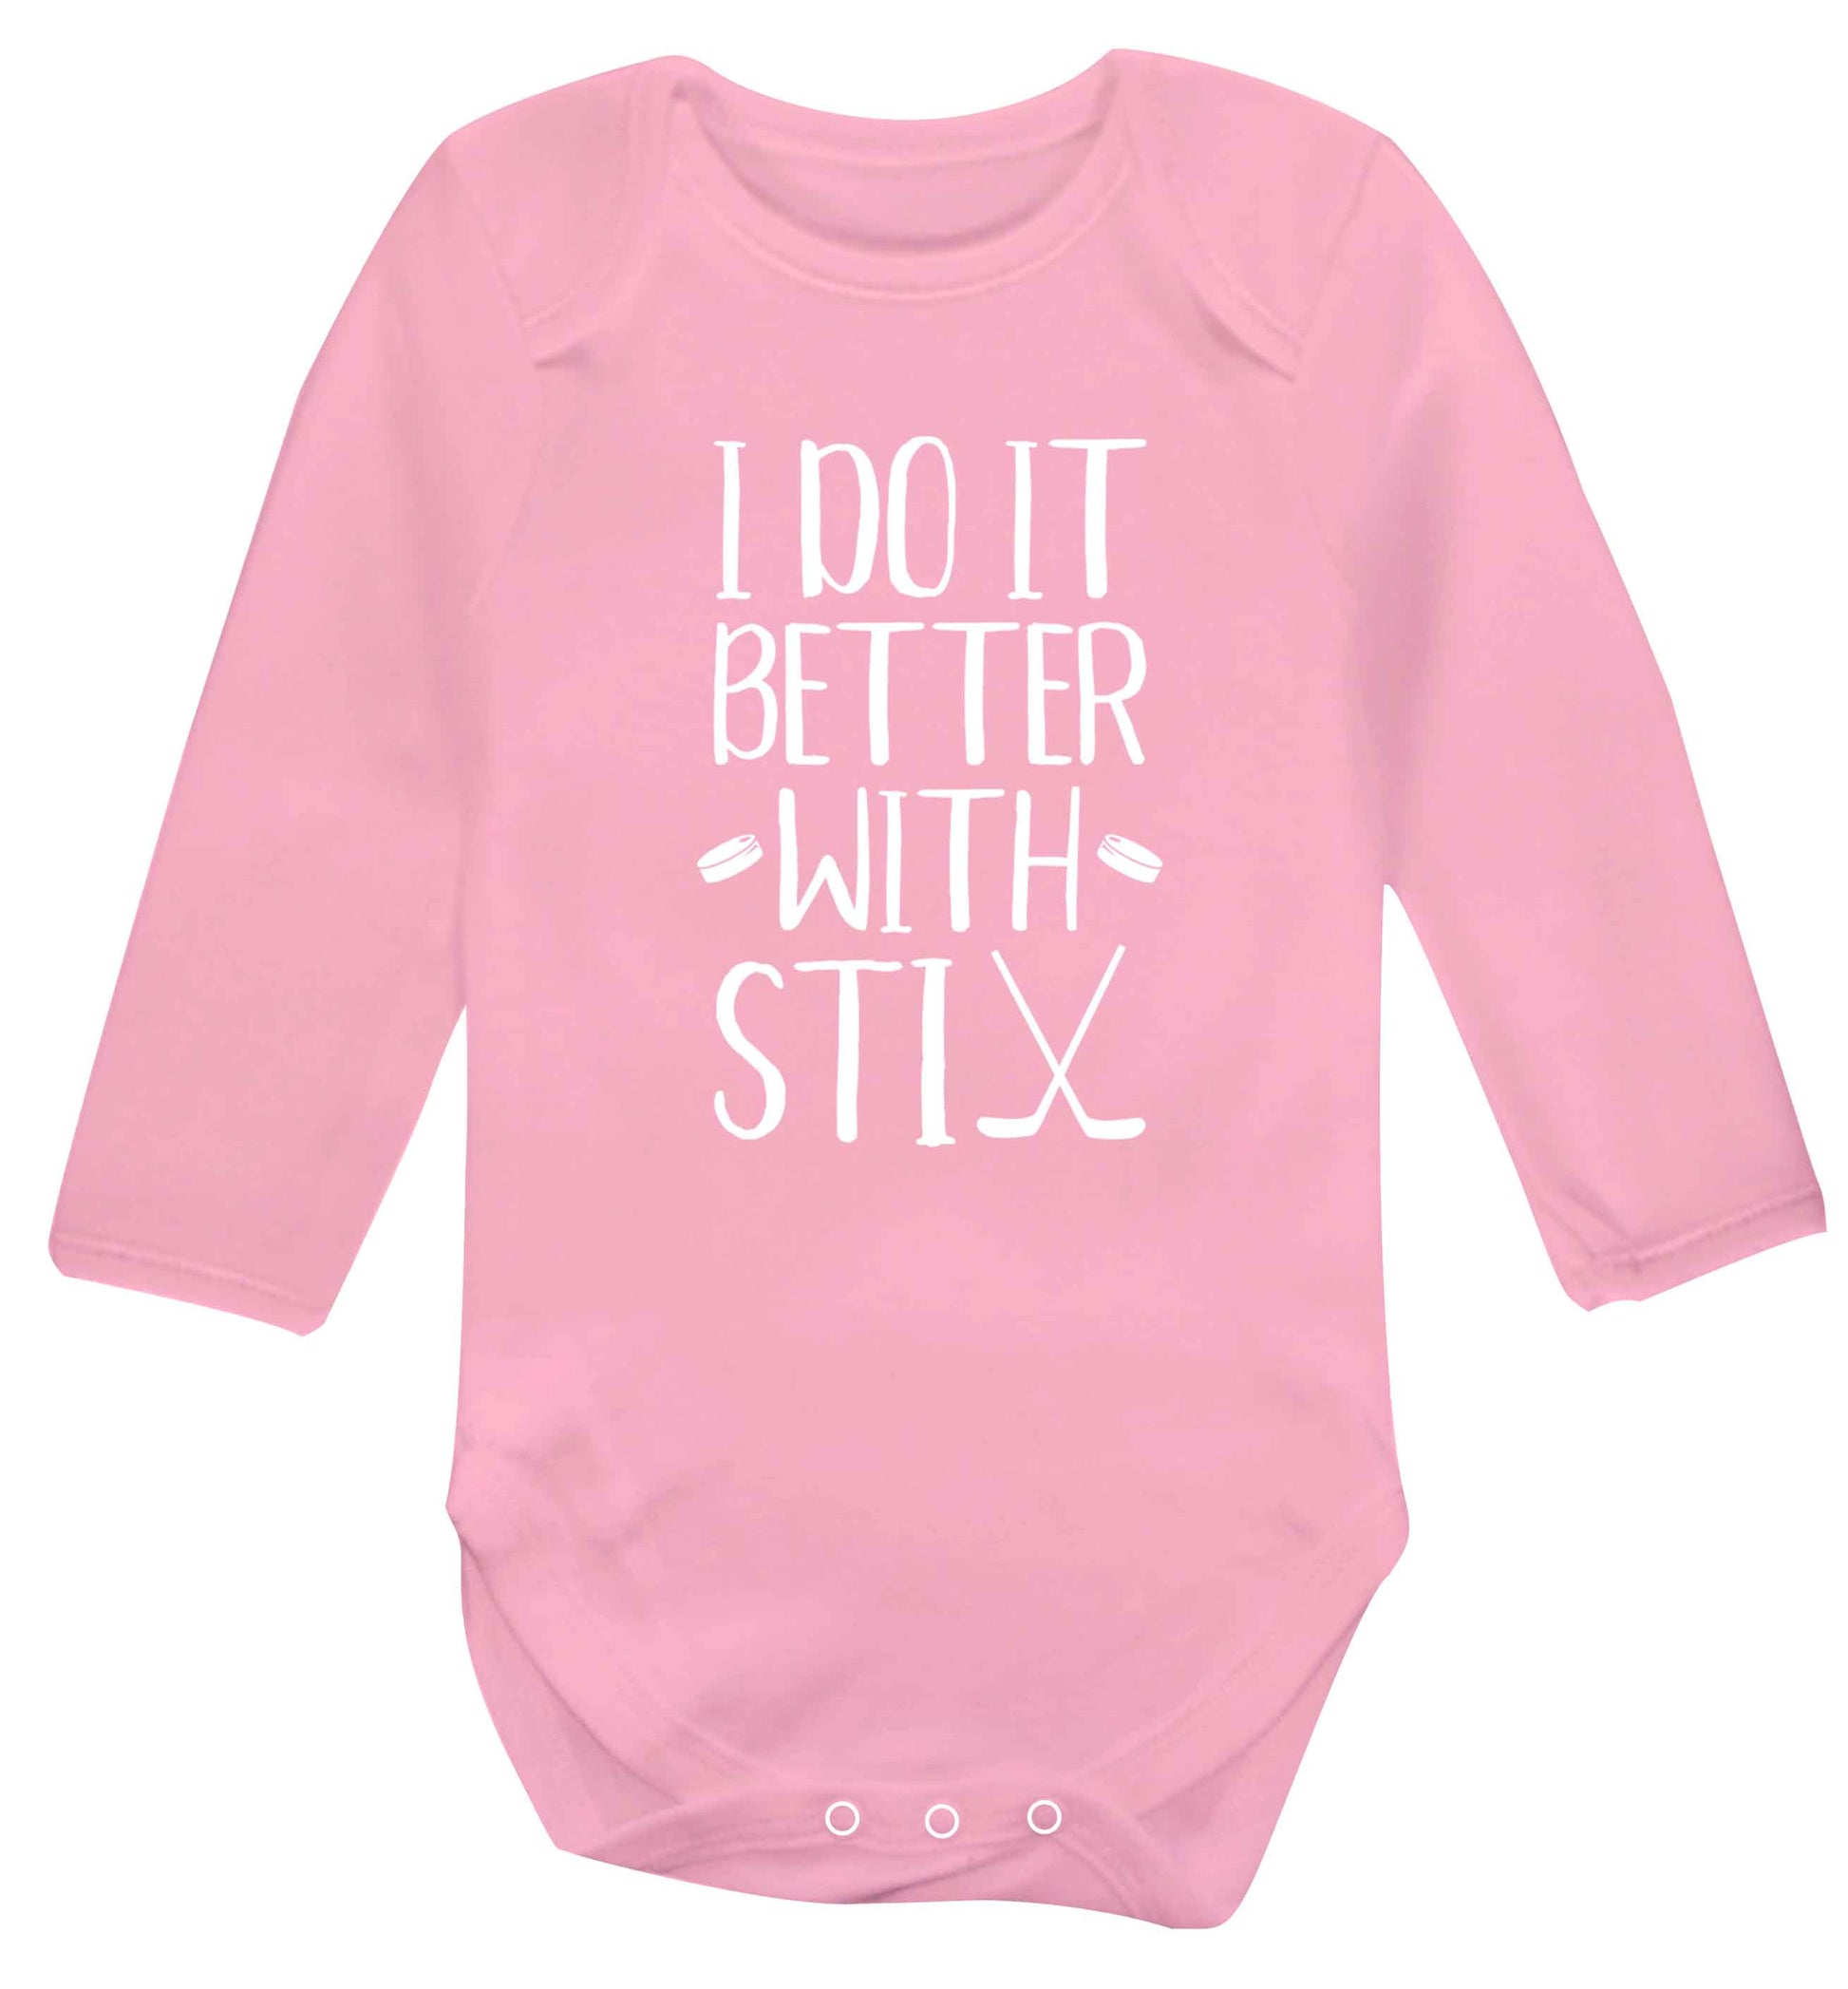 I do it better with stix (hockey) Baby Vest long sleeved pale pink 6-12 months